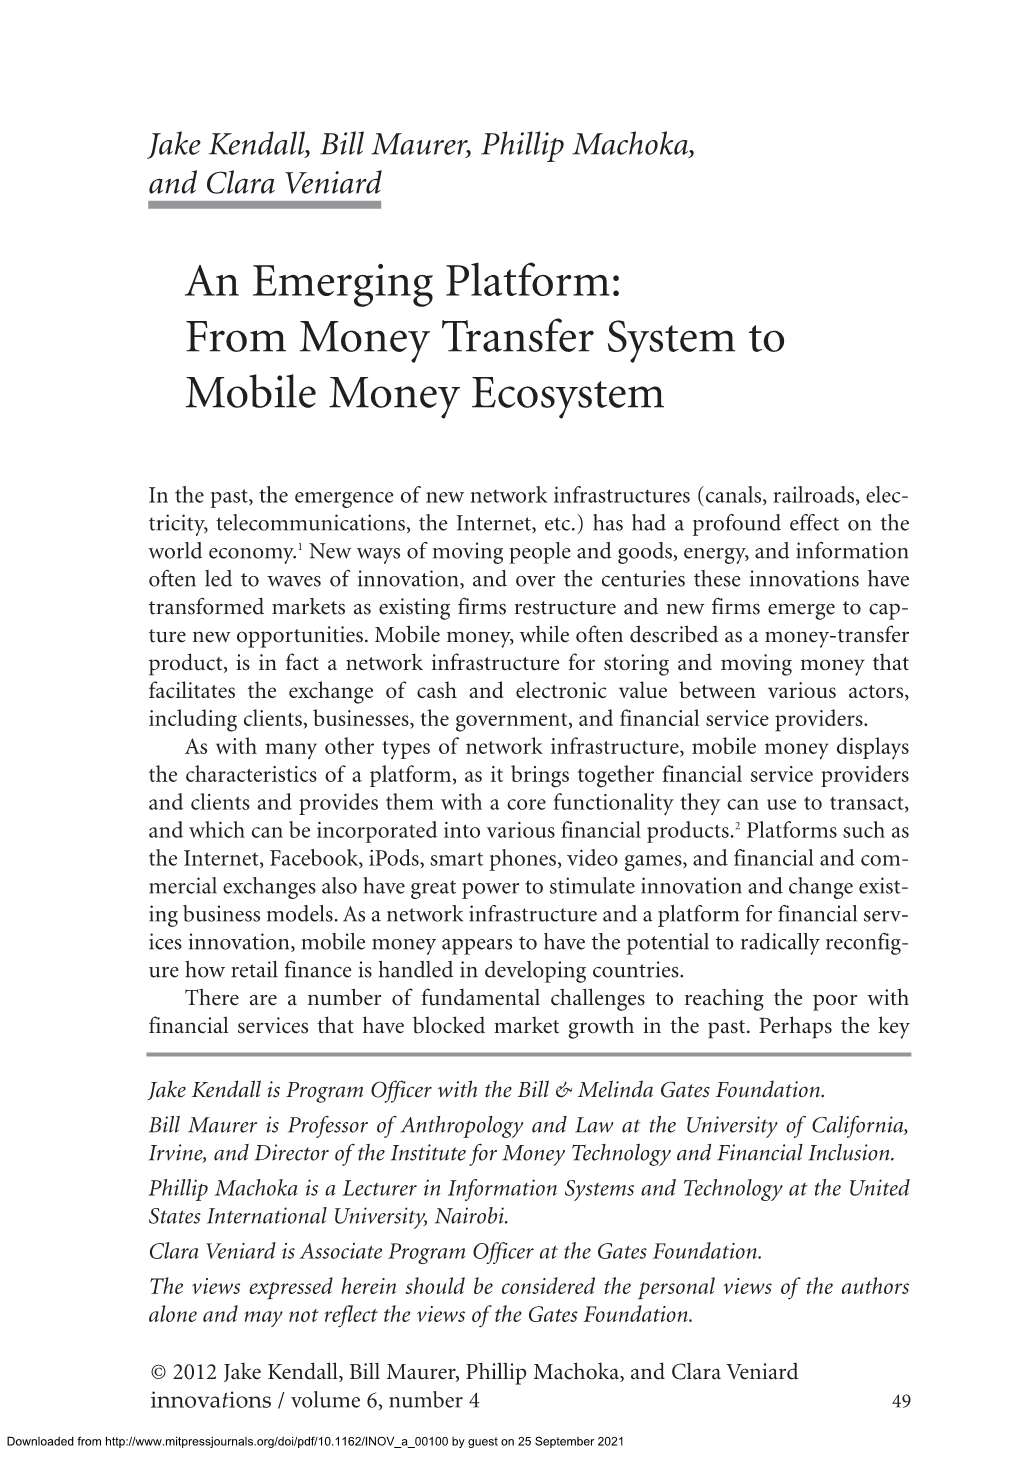 An Emerging Platform: from Money Transfer System to Mobile Money Ecosystem